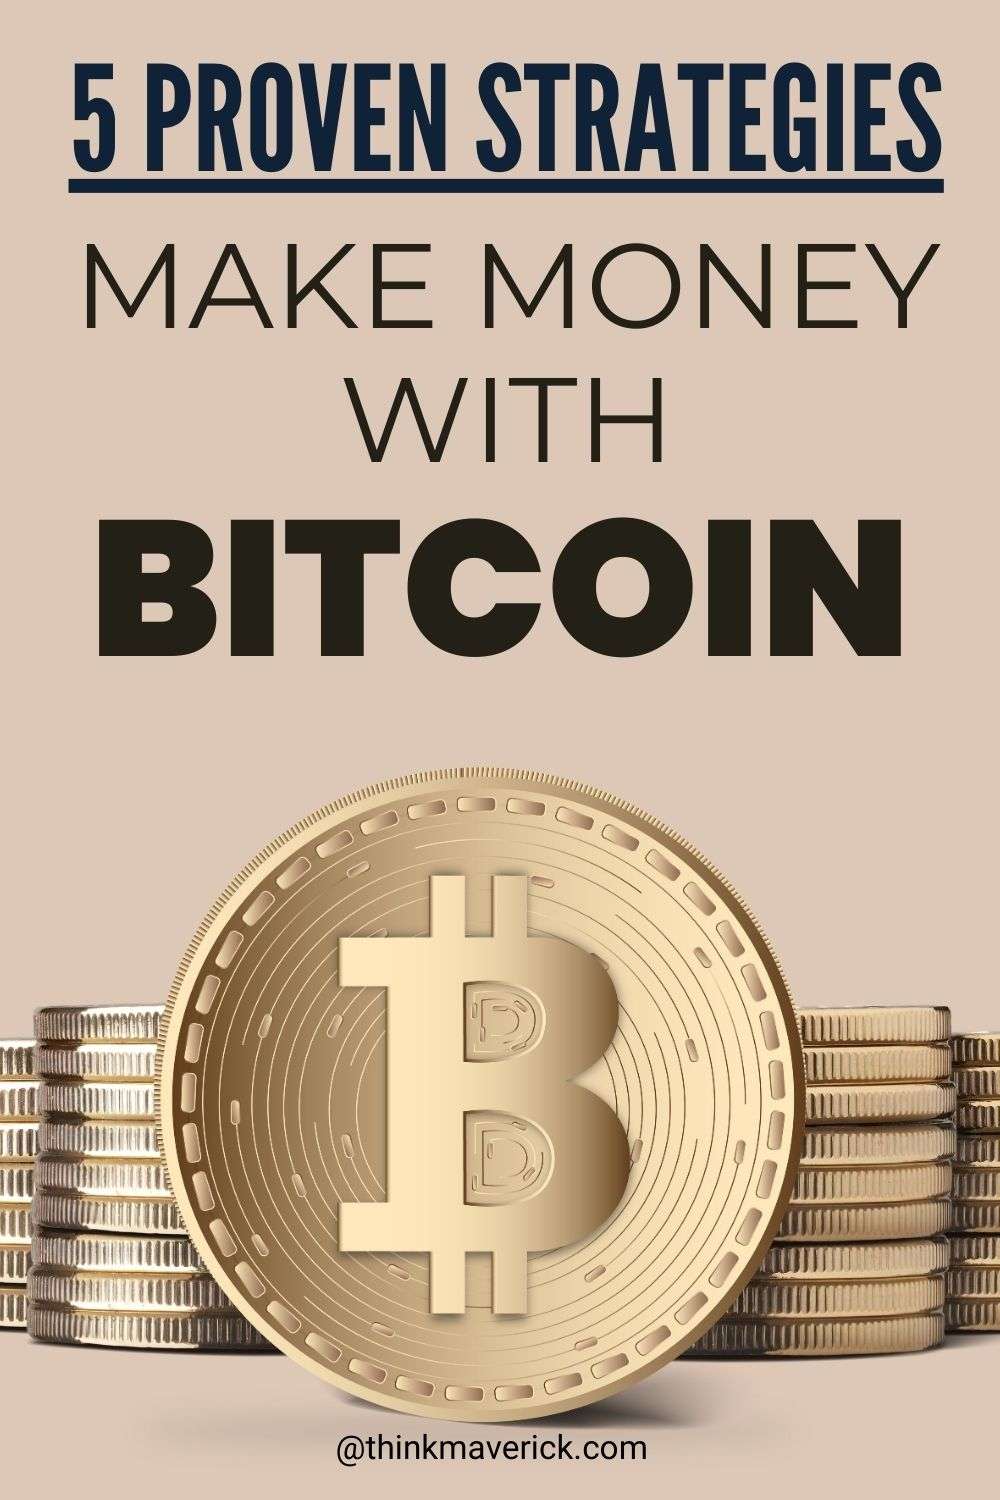 5 Proven Strategies to Make Money with Bitcoin